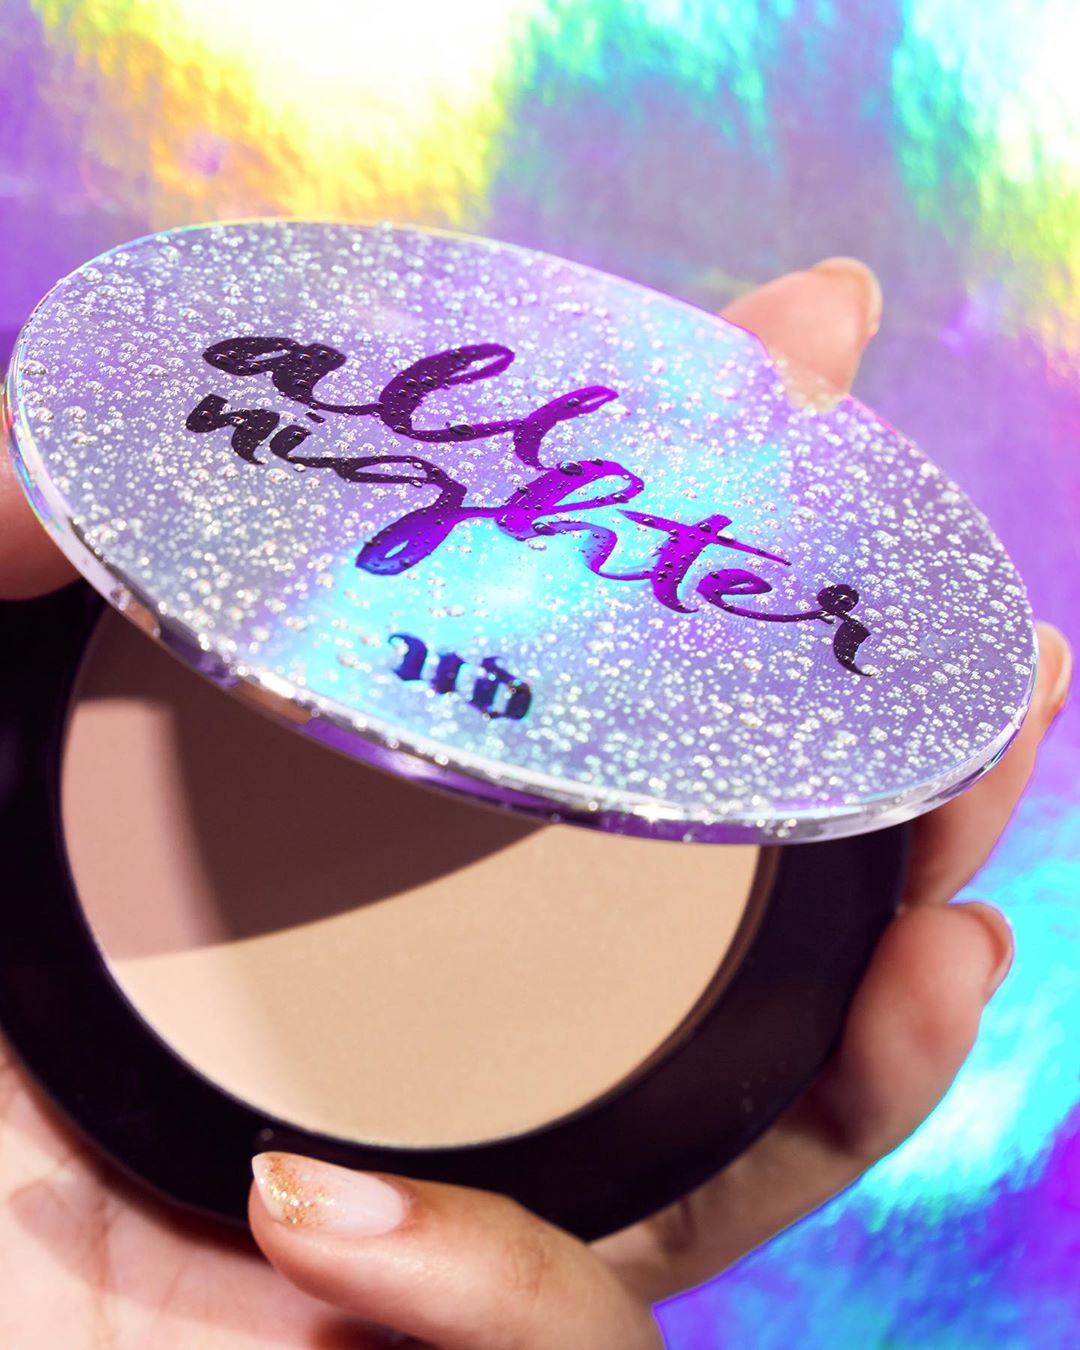 Urban Decay Cosmetics - Make your makeup instantly waterproof while controlling oil and shine with our All Nighter Waterproof Setting Powder—NOW 50% OFF at ULTA.com and in-store at @ULTABEAUTY! 💜 Link...